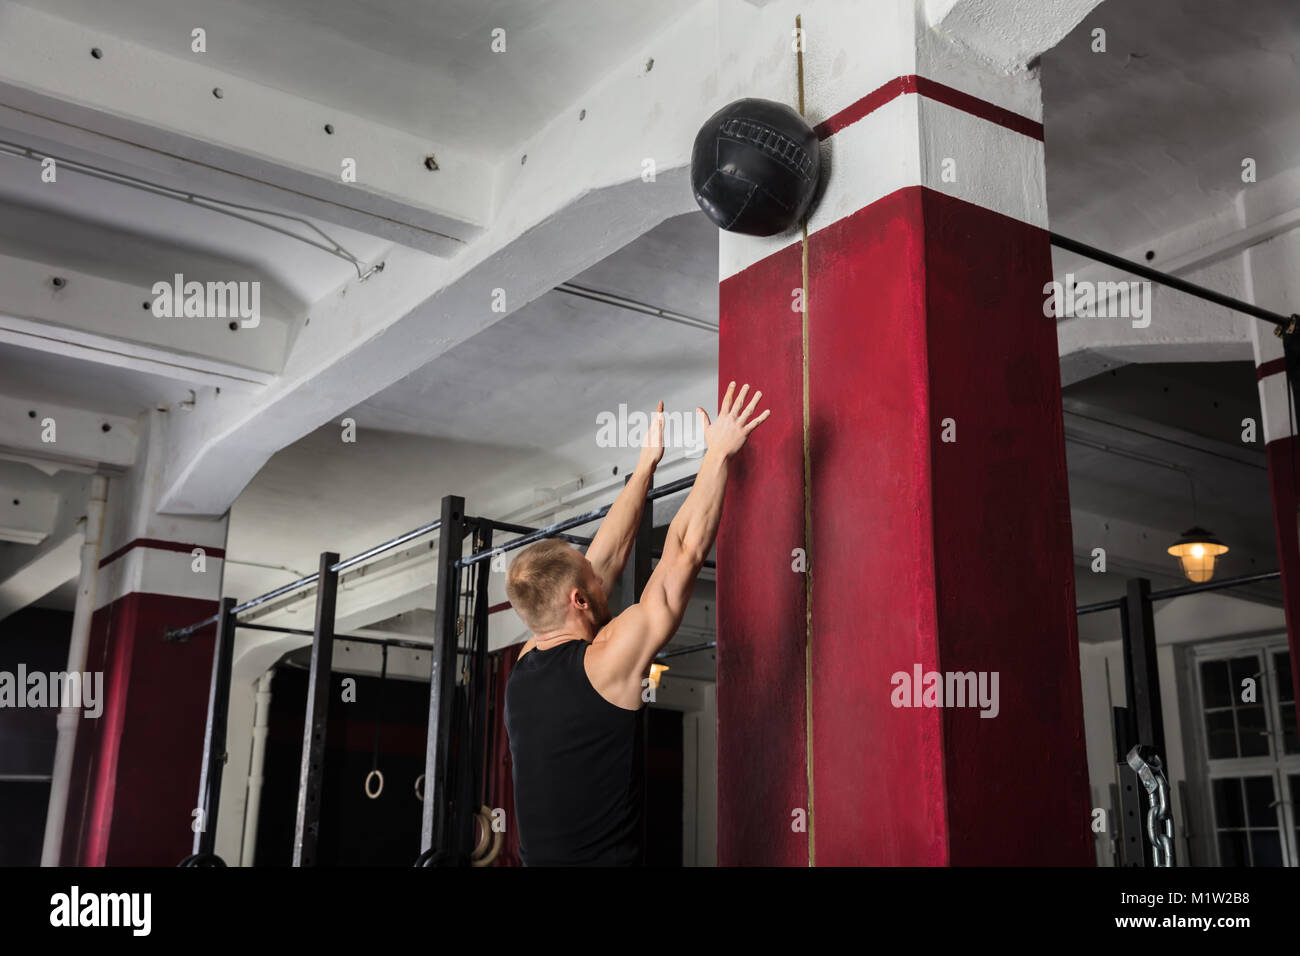 Young Male Athlete Doing Wall Balls Exercise At The Gym Stock Photo